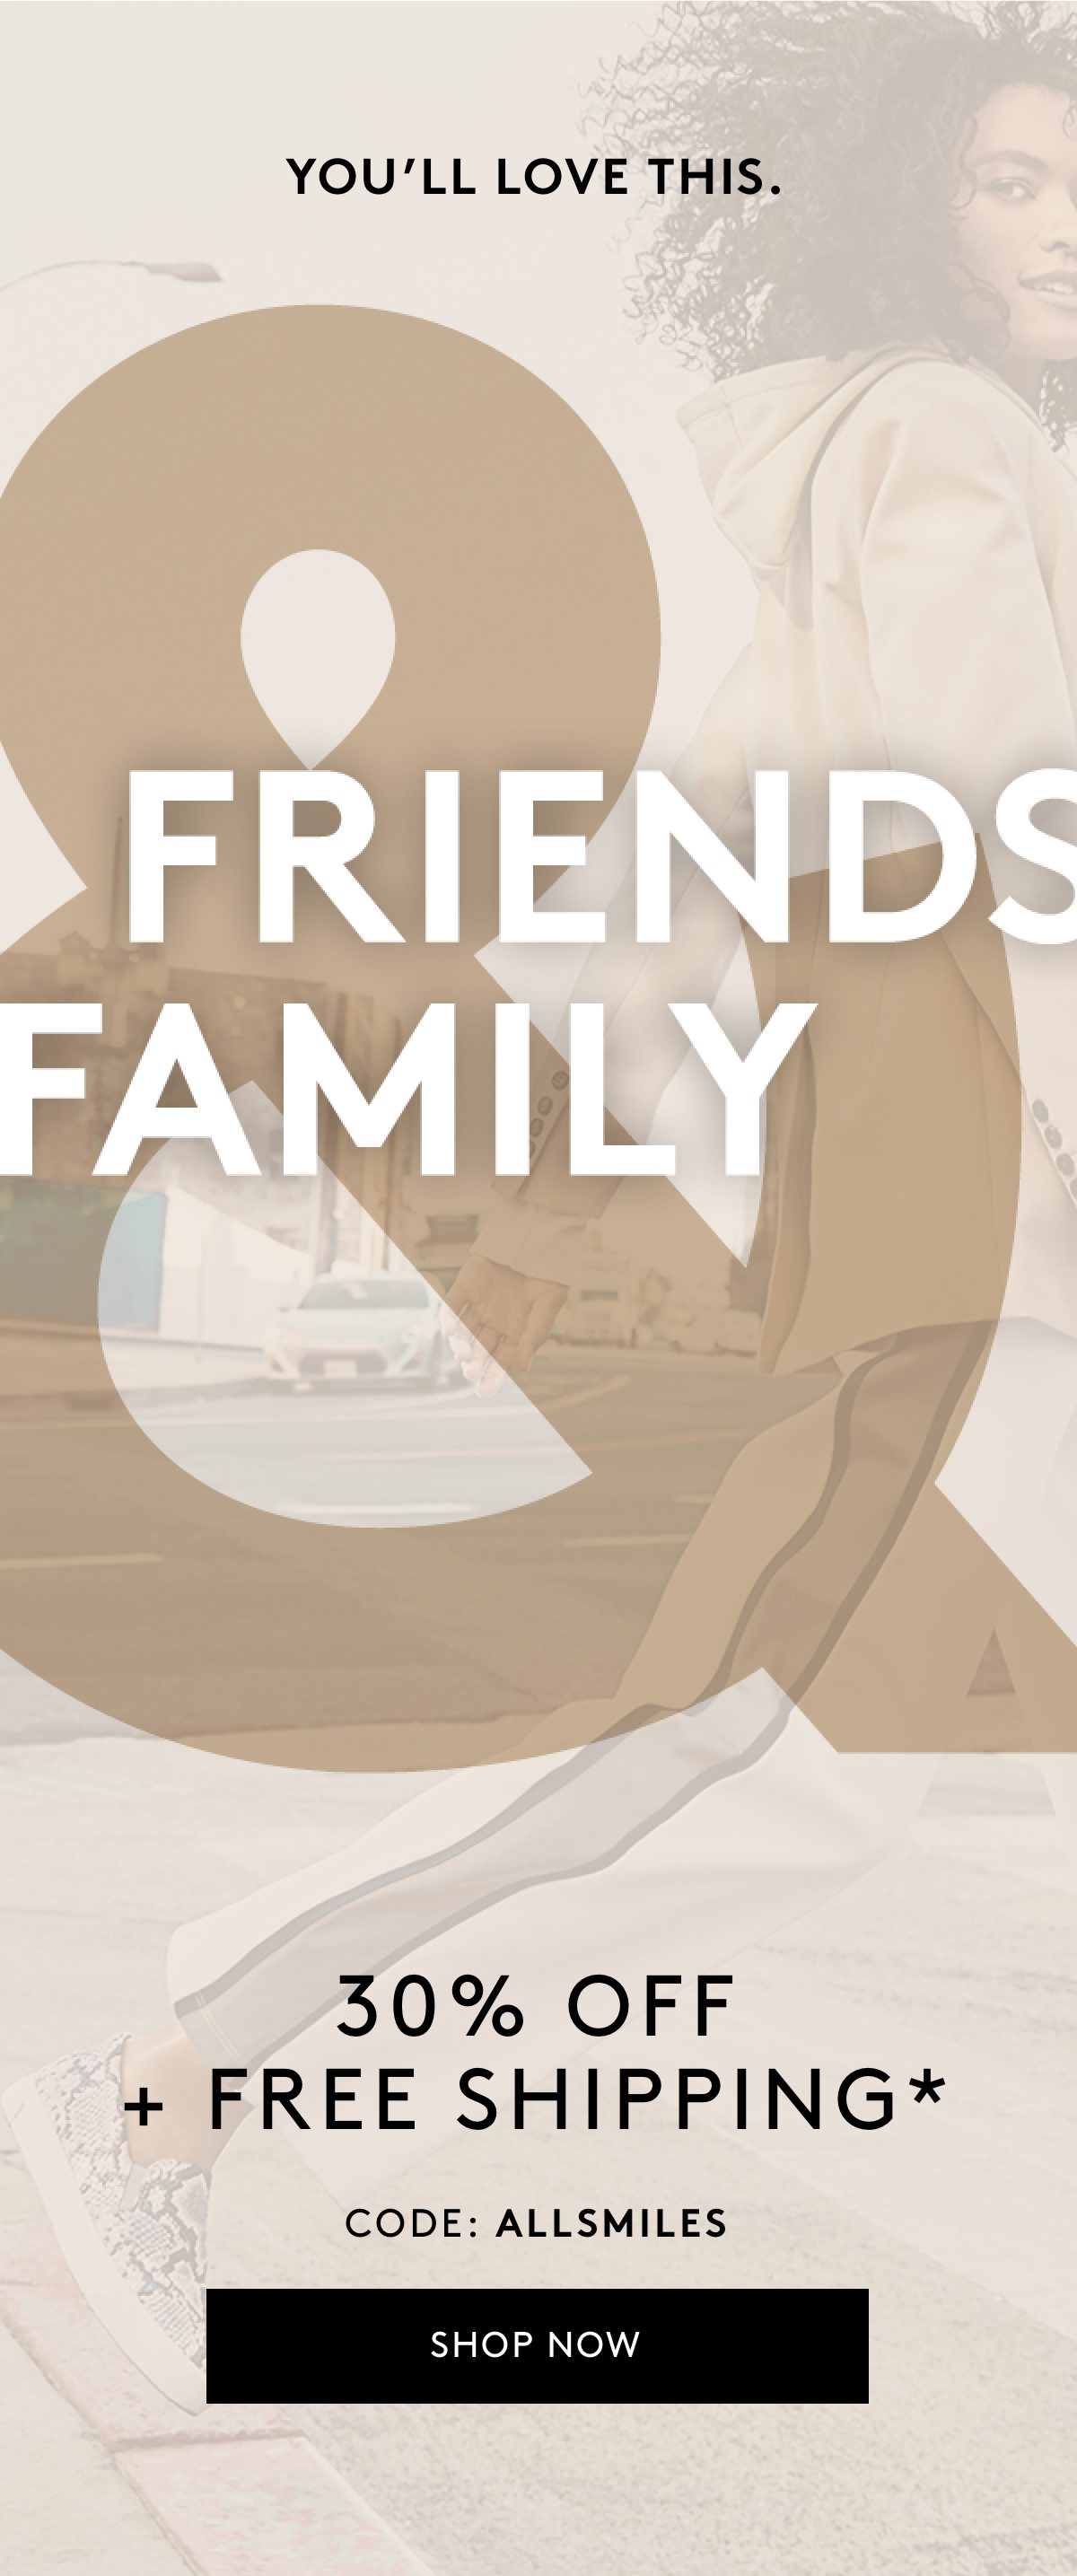 You'll love this. friends & family 30% off + free shipping* code: allsmiles shop now